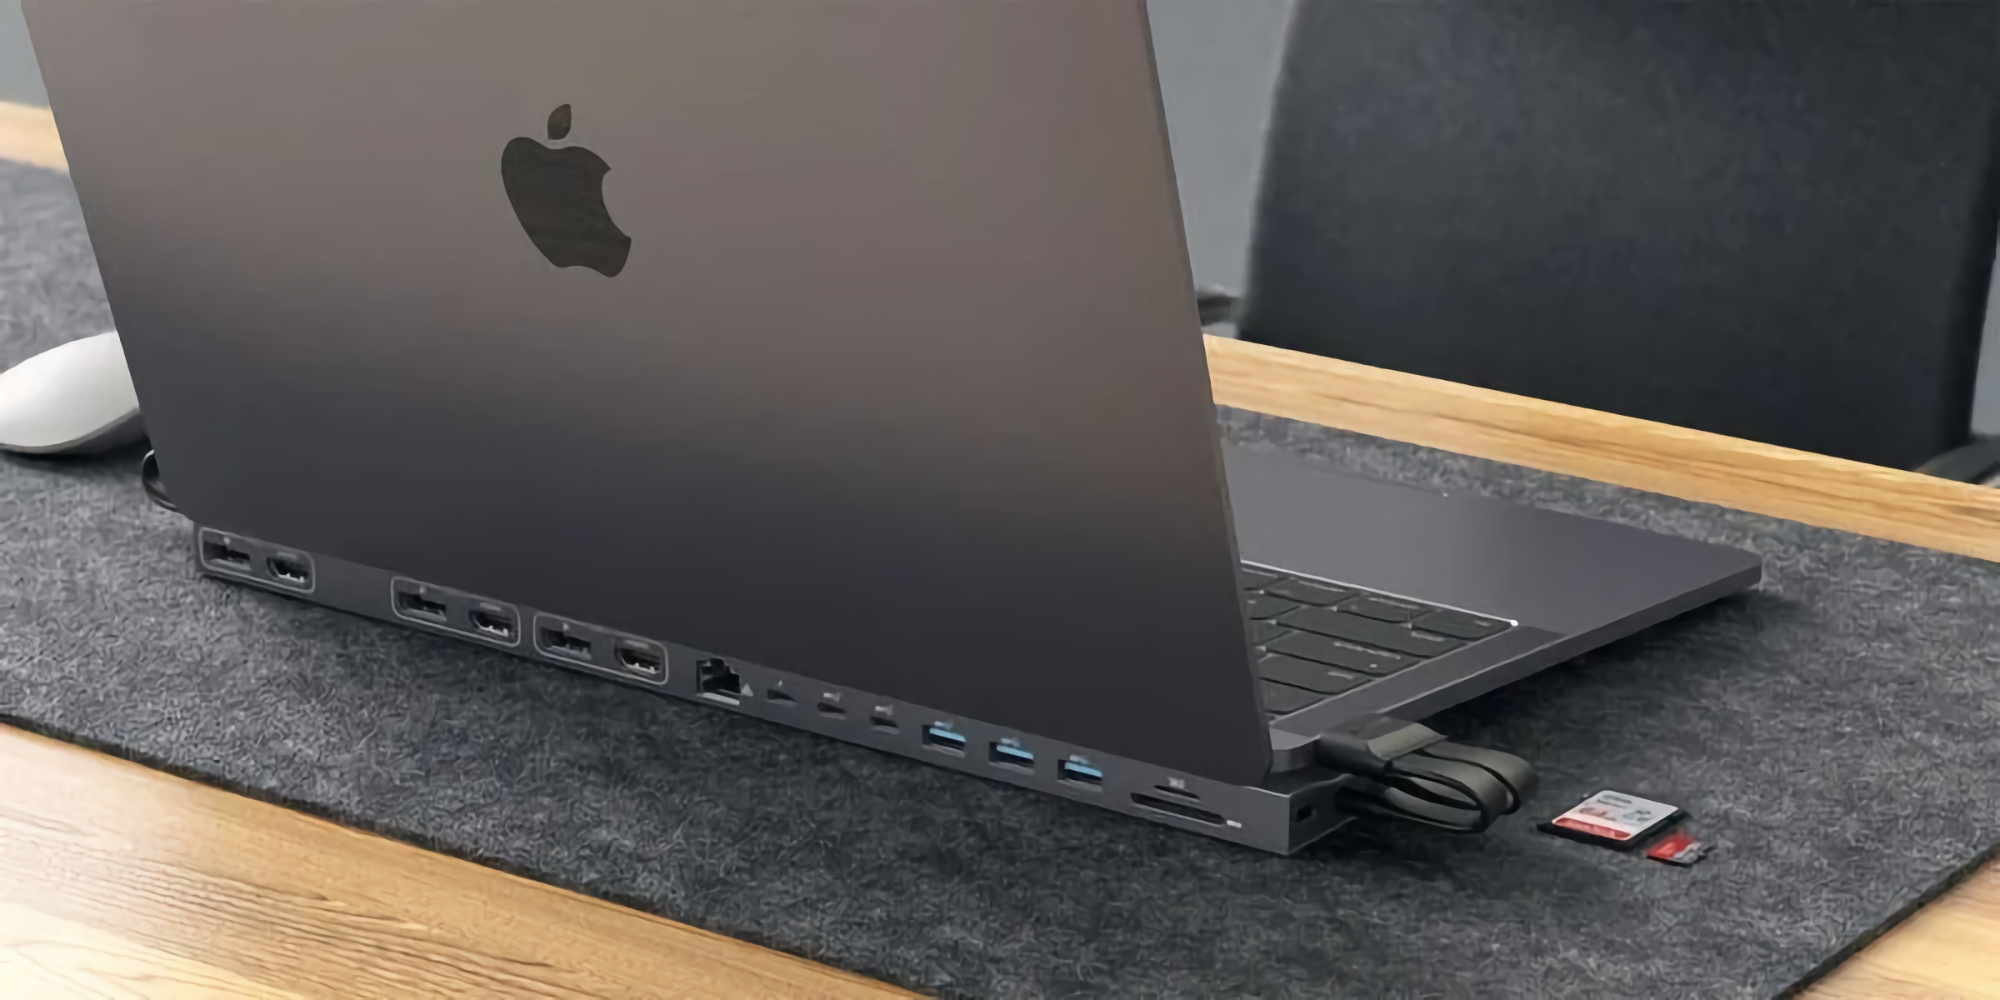 HyperDrive Triple 4K Display Dock: USB hub for MacBook Pro with multiple ports and support for three 4K monitors